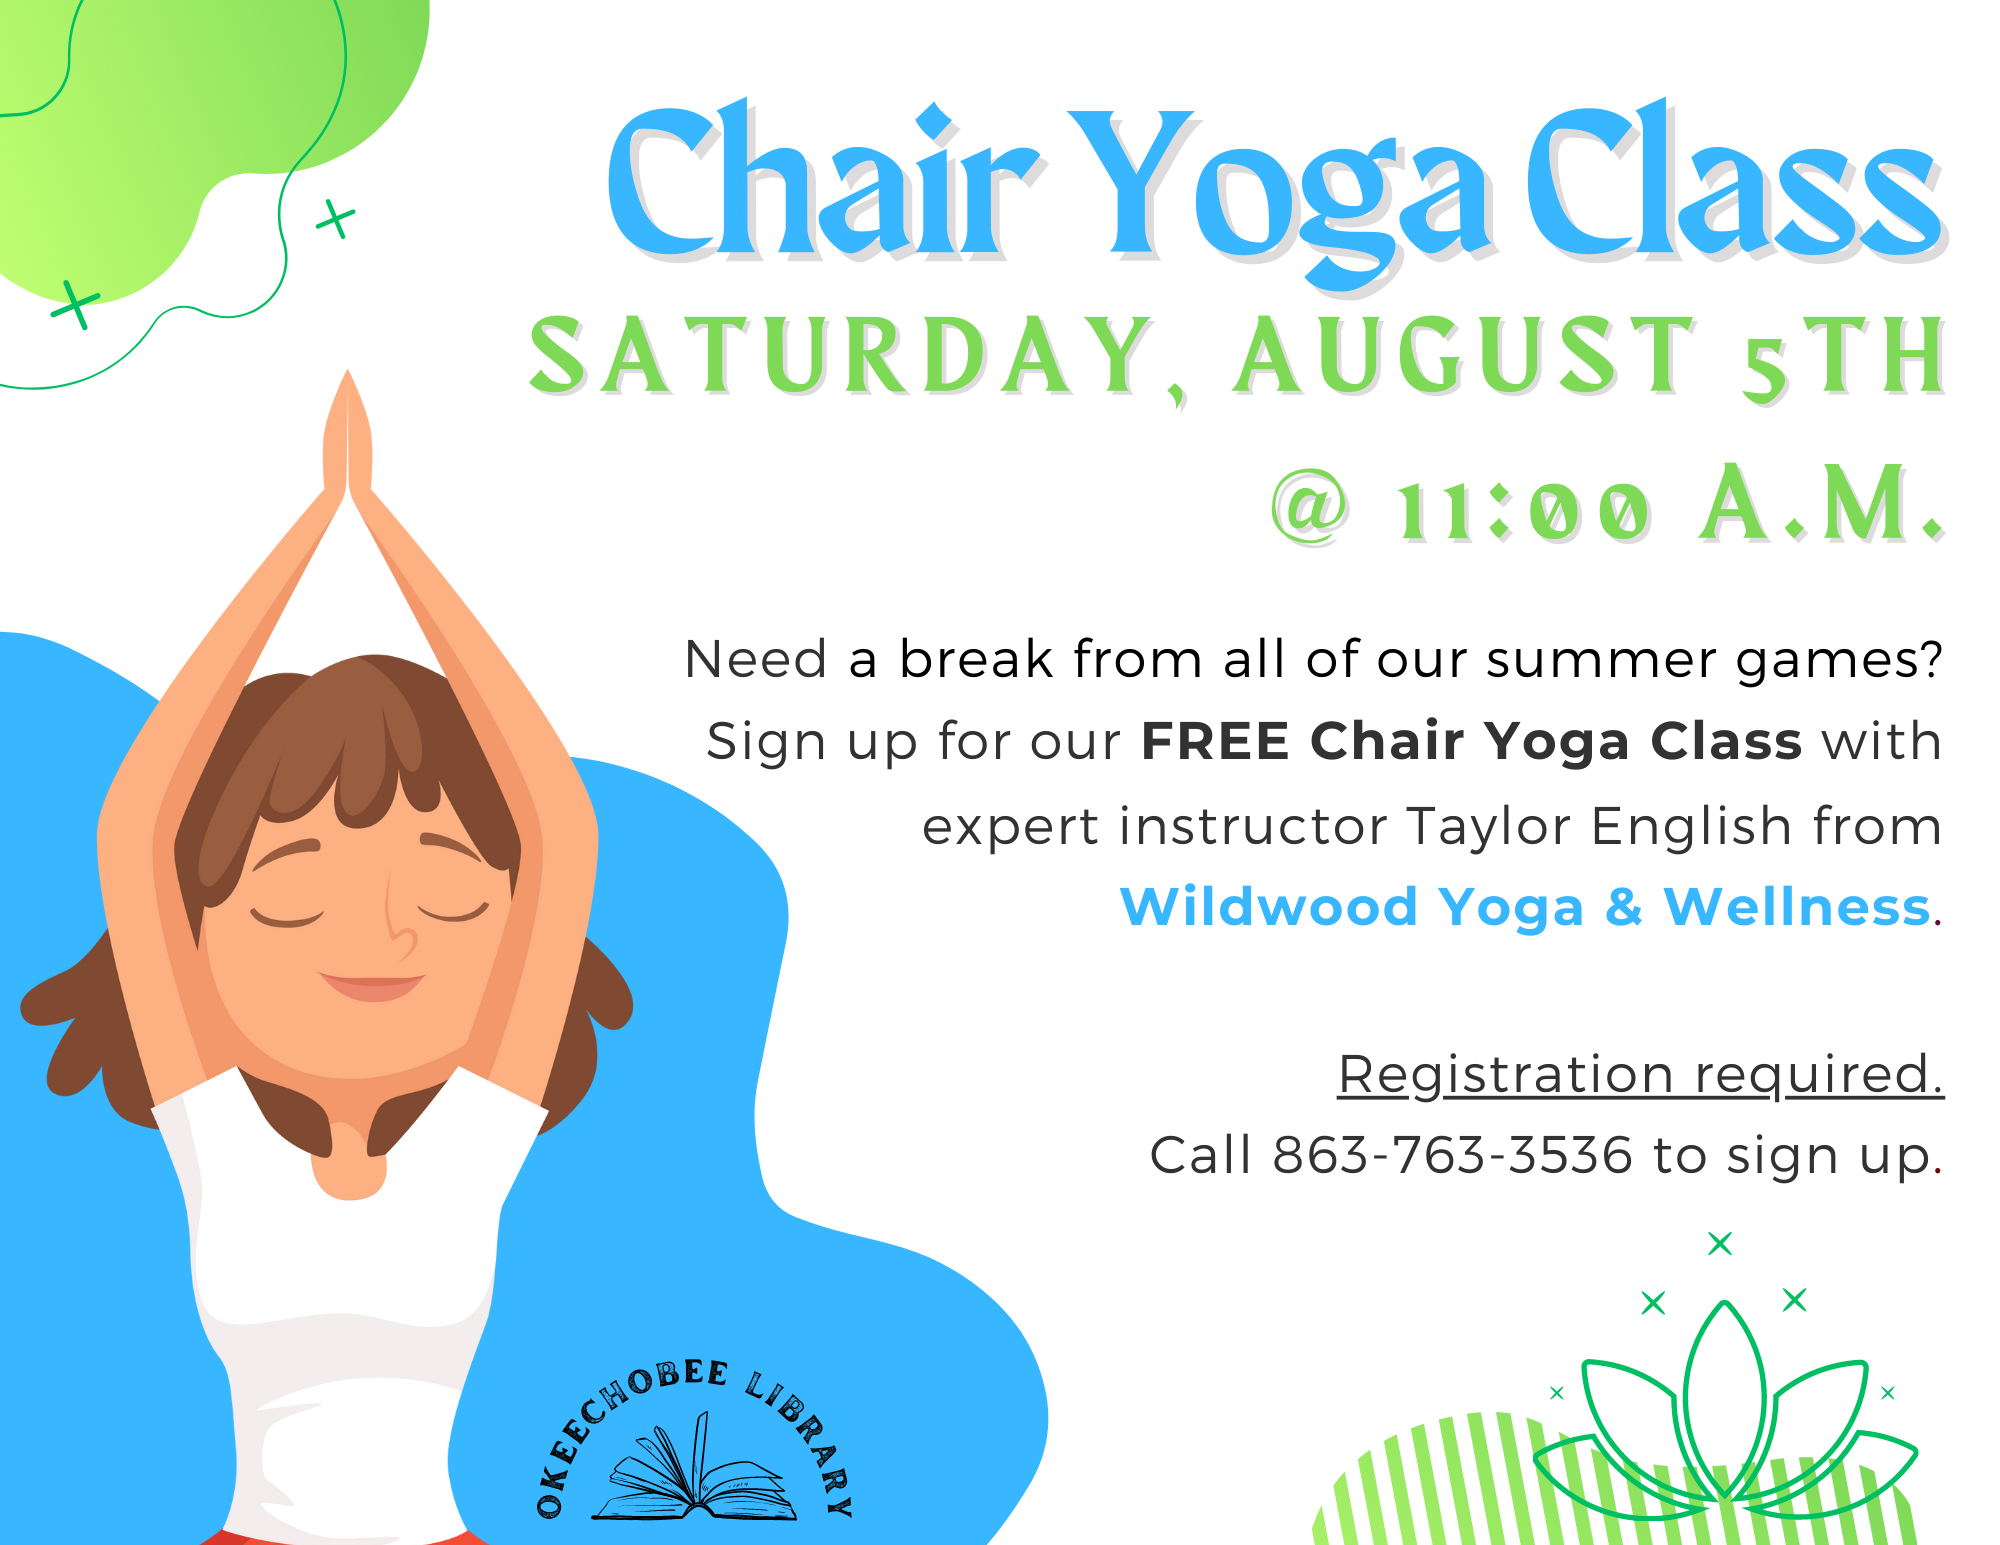 Looking for an easy exercise to help you workout?  Sign up for our FREE Chair Yoga Class on Saturday, August 5th @ 11:00 a.m. with expert instructor Taylor English from Wildwood Yoga & Wellness.